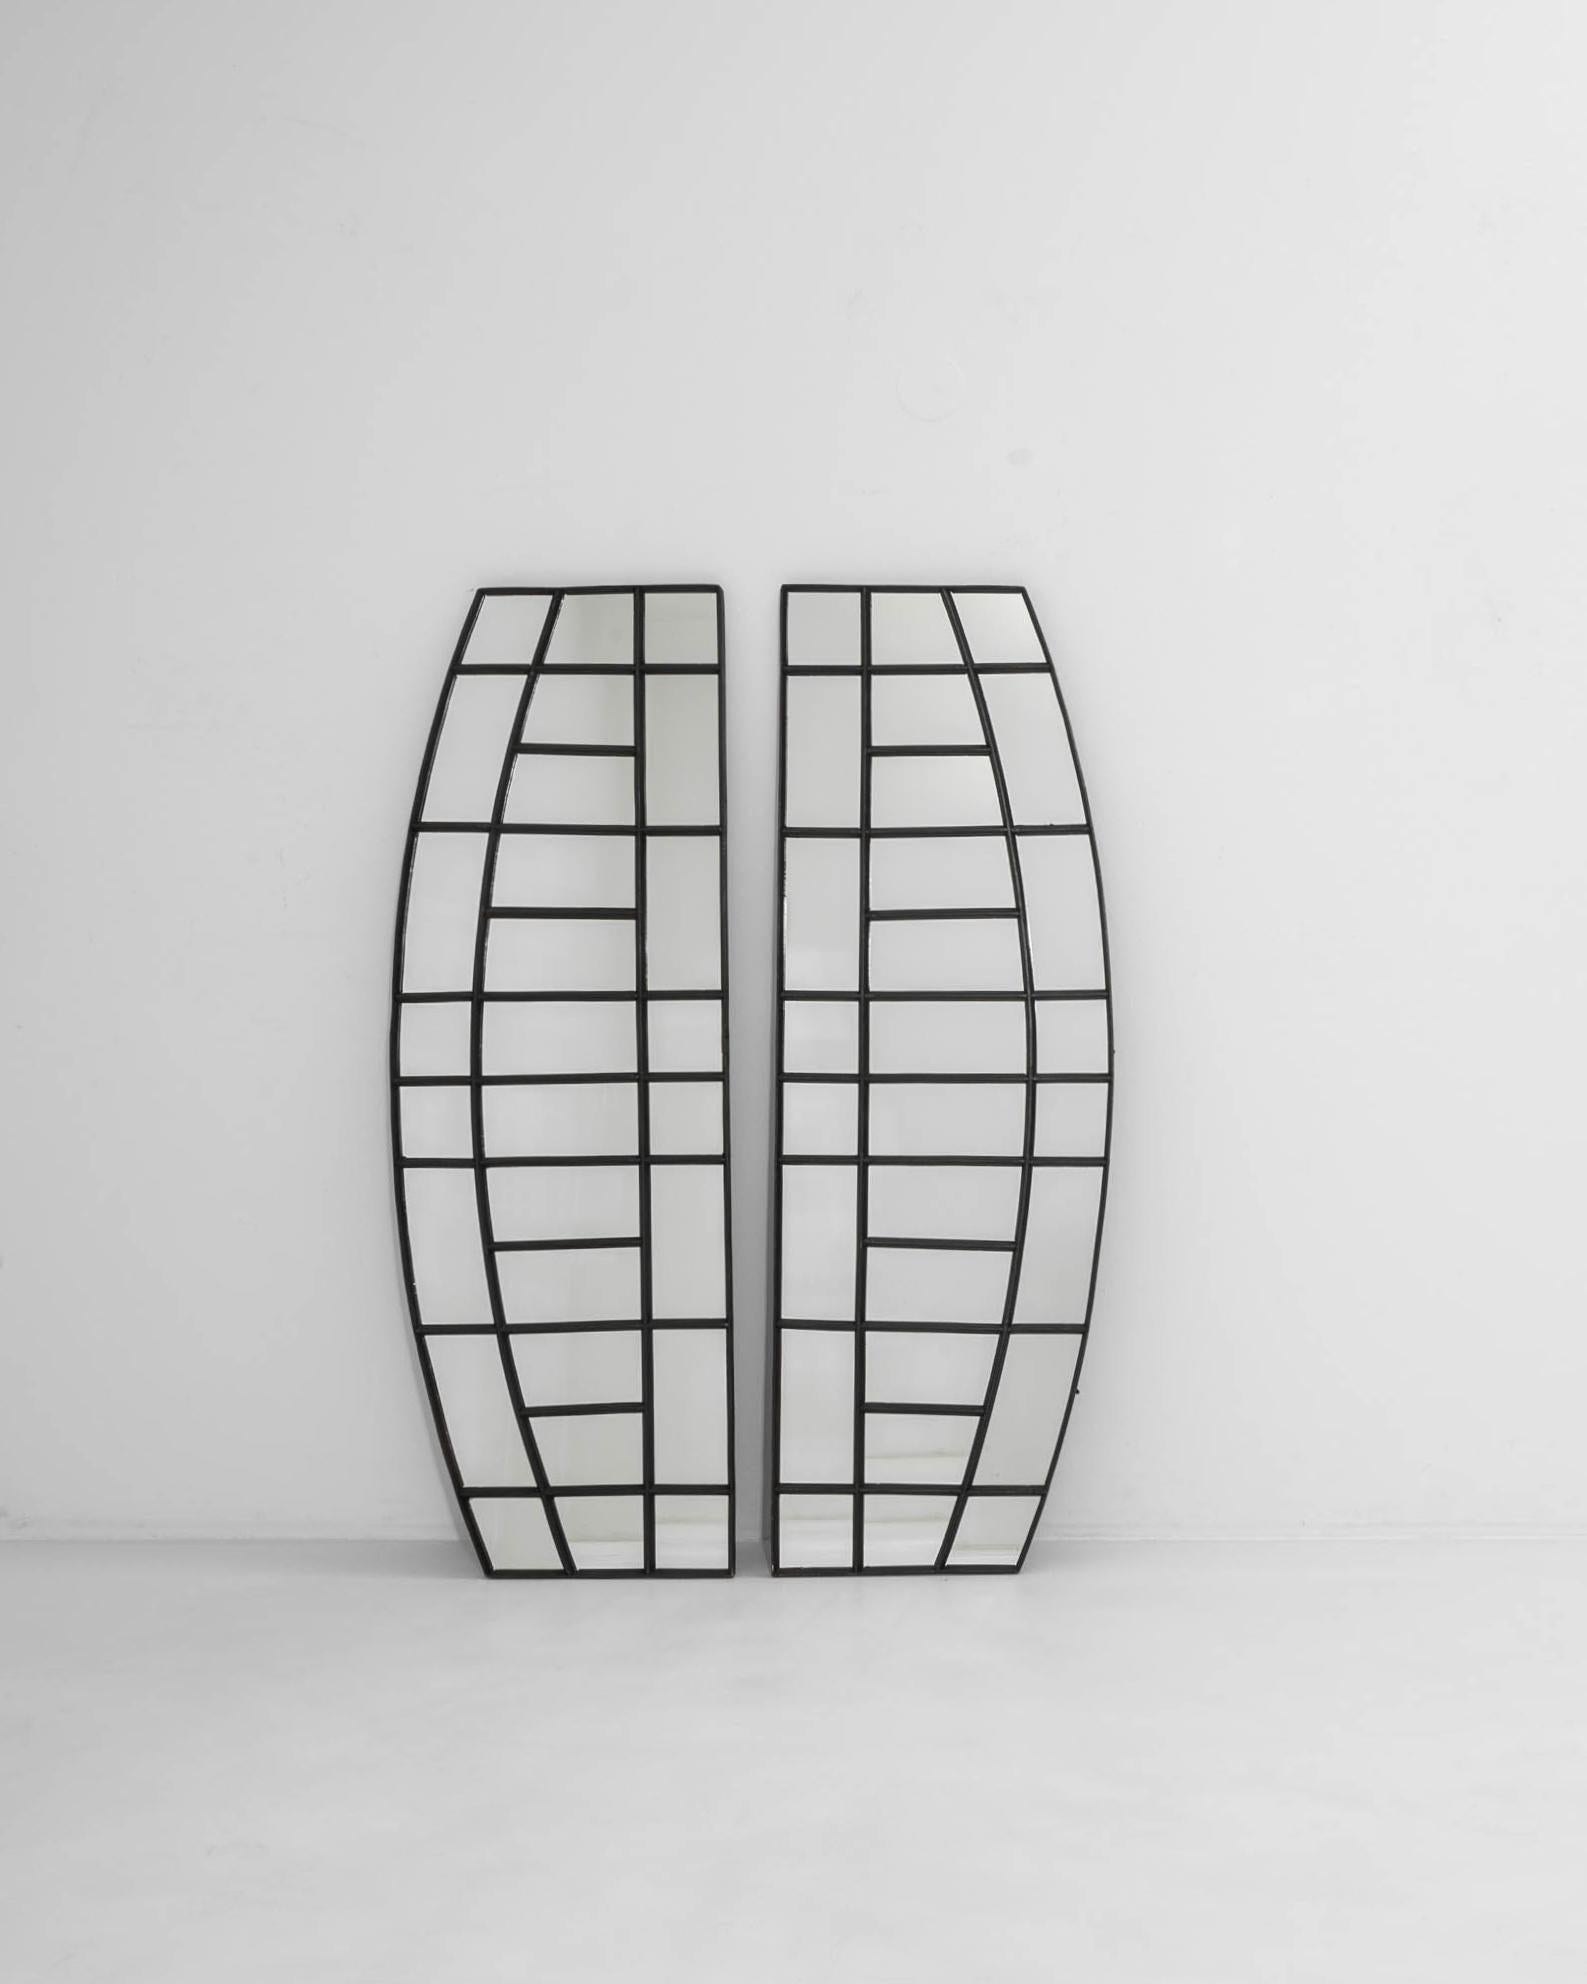 The unique design of this pair of vintage window mirrors makes an immediate impression. Made in France in the 20th century, the interplay of broad curves and straight lines creates a striking geometry, emphasized by the graphic bars of the dark iron